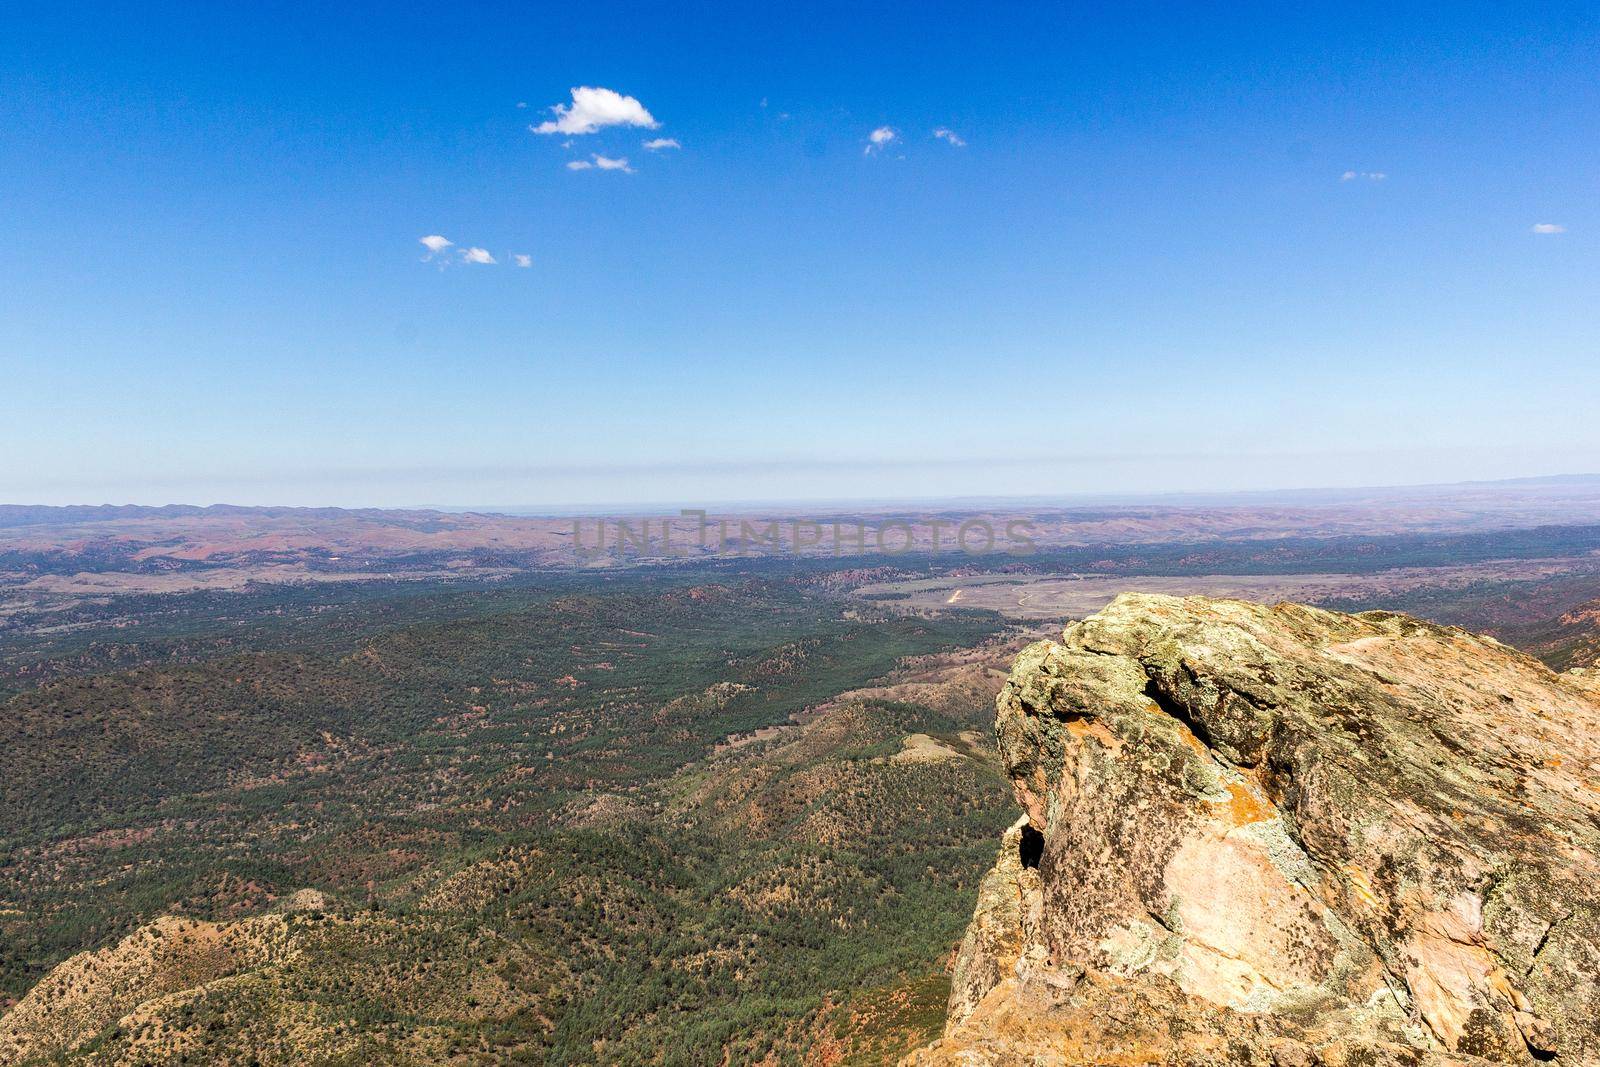 View of the Flinders Ranges from St Mary's Peak, South Australia by bettercallcurry